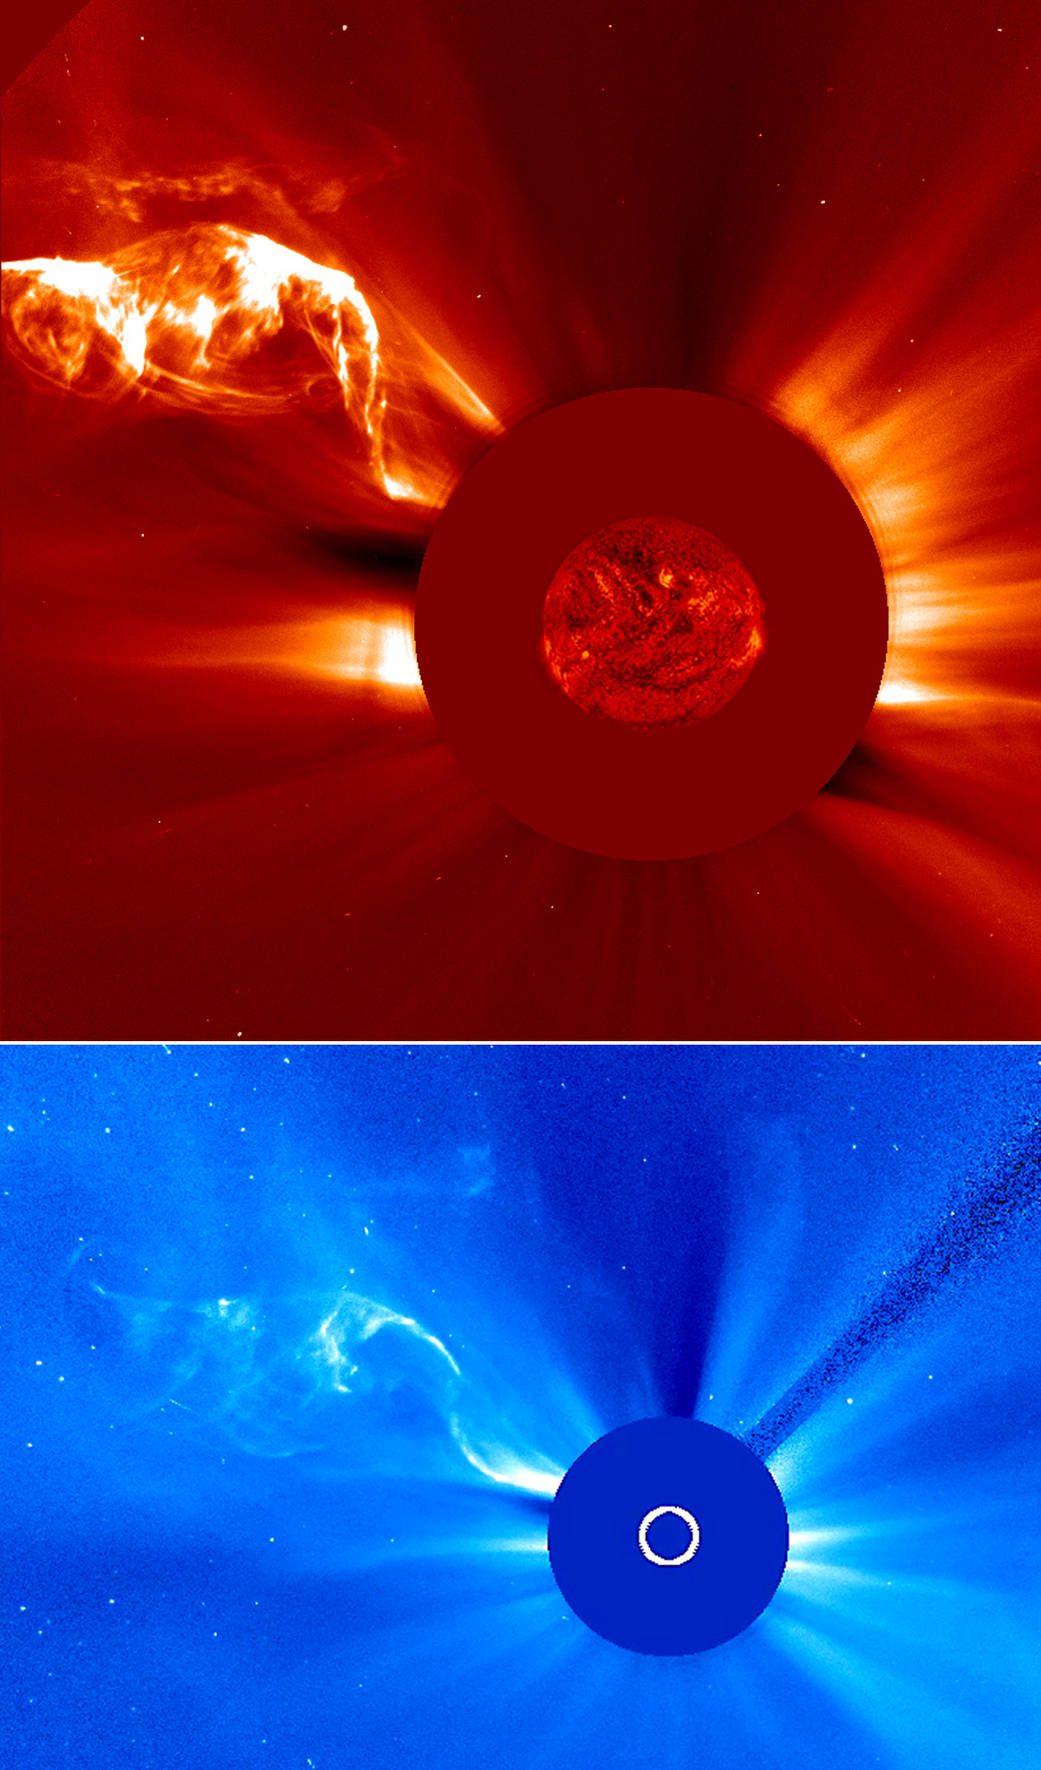 An elongated solar filament that extended almost half the Sun's visible hemisphere erupted into space.